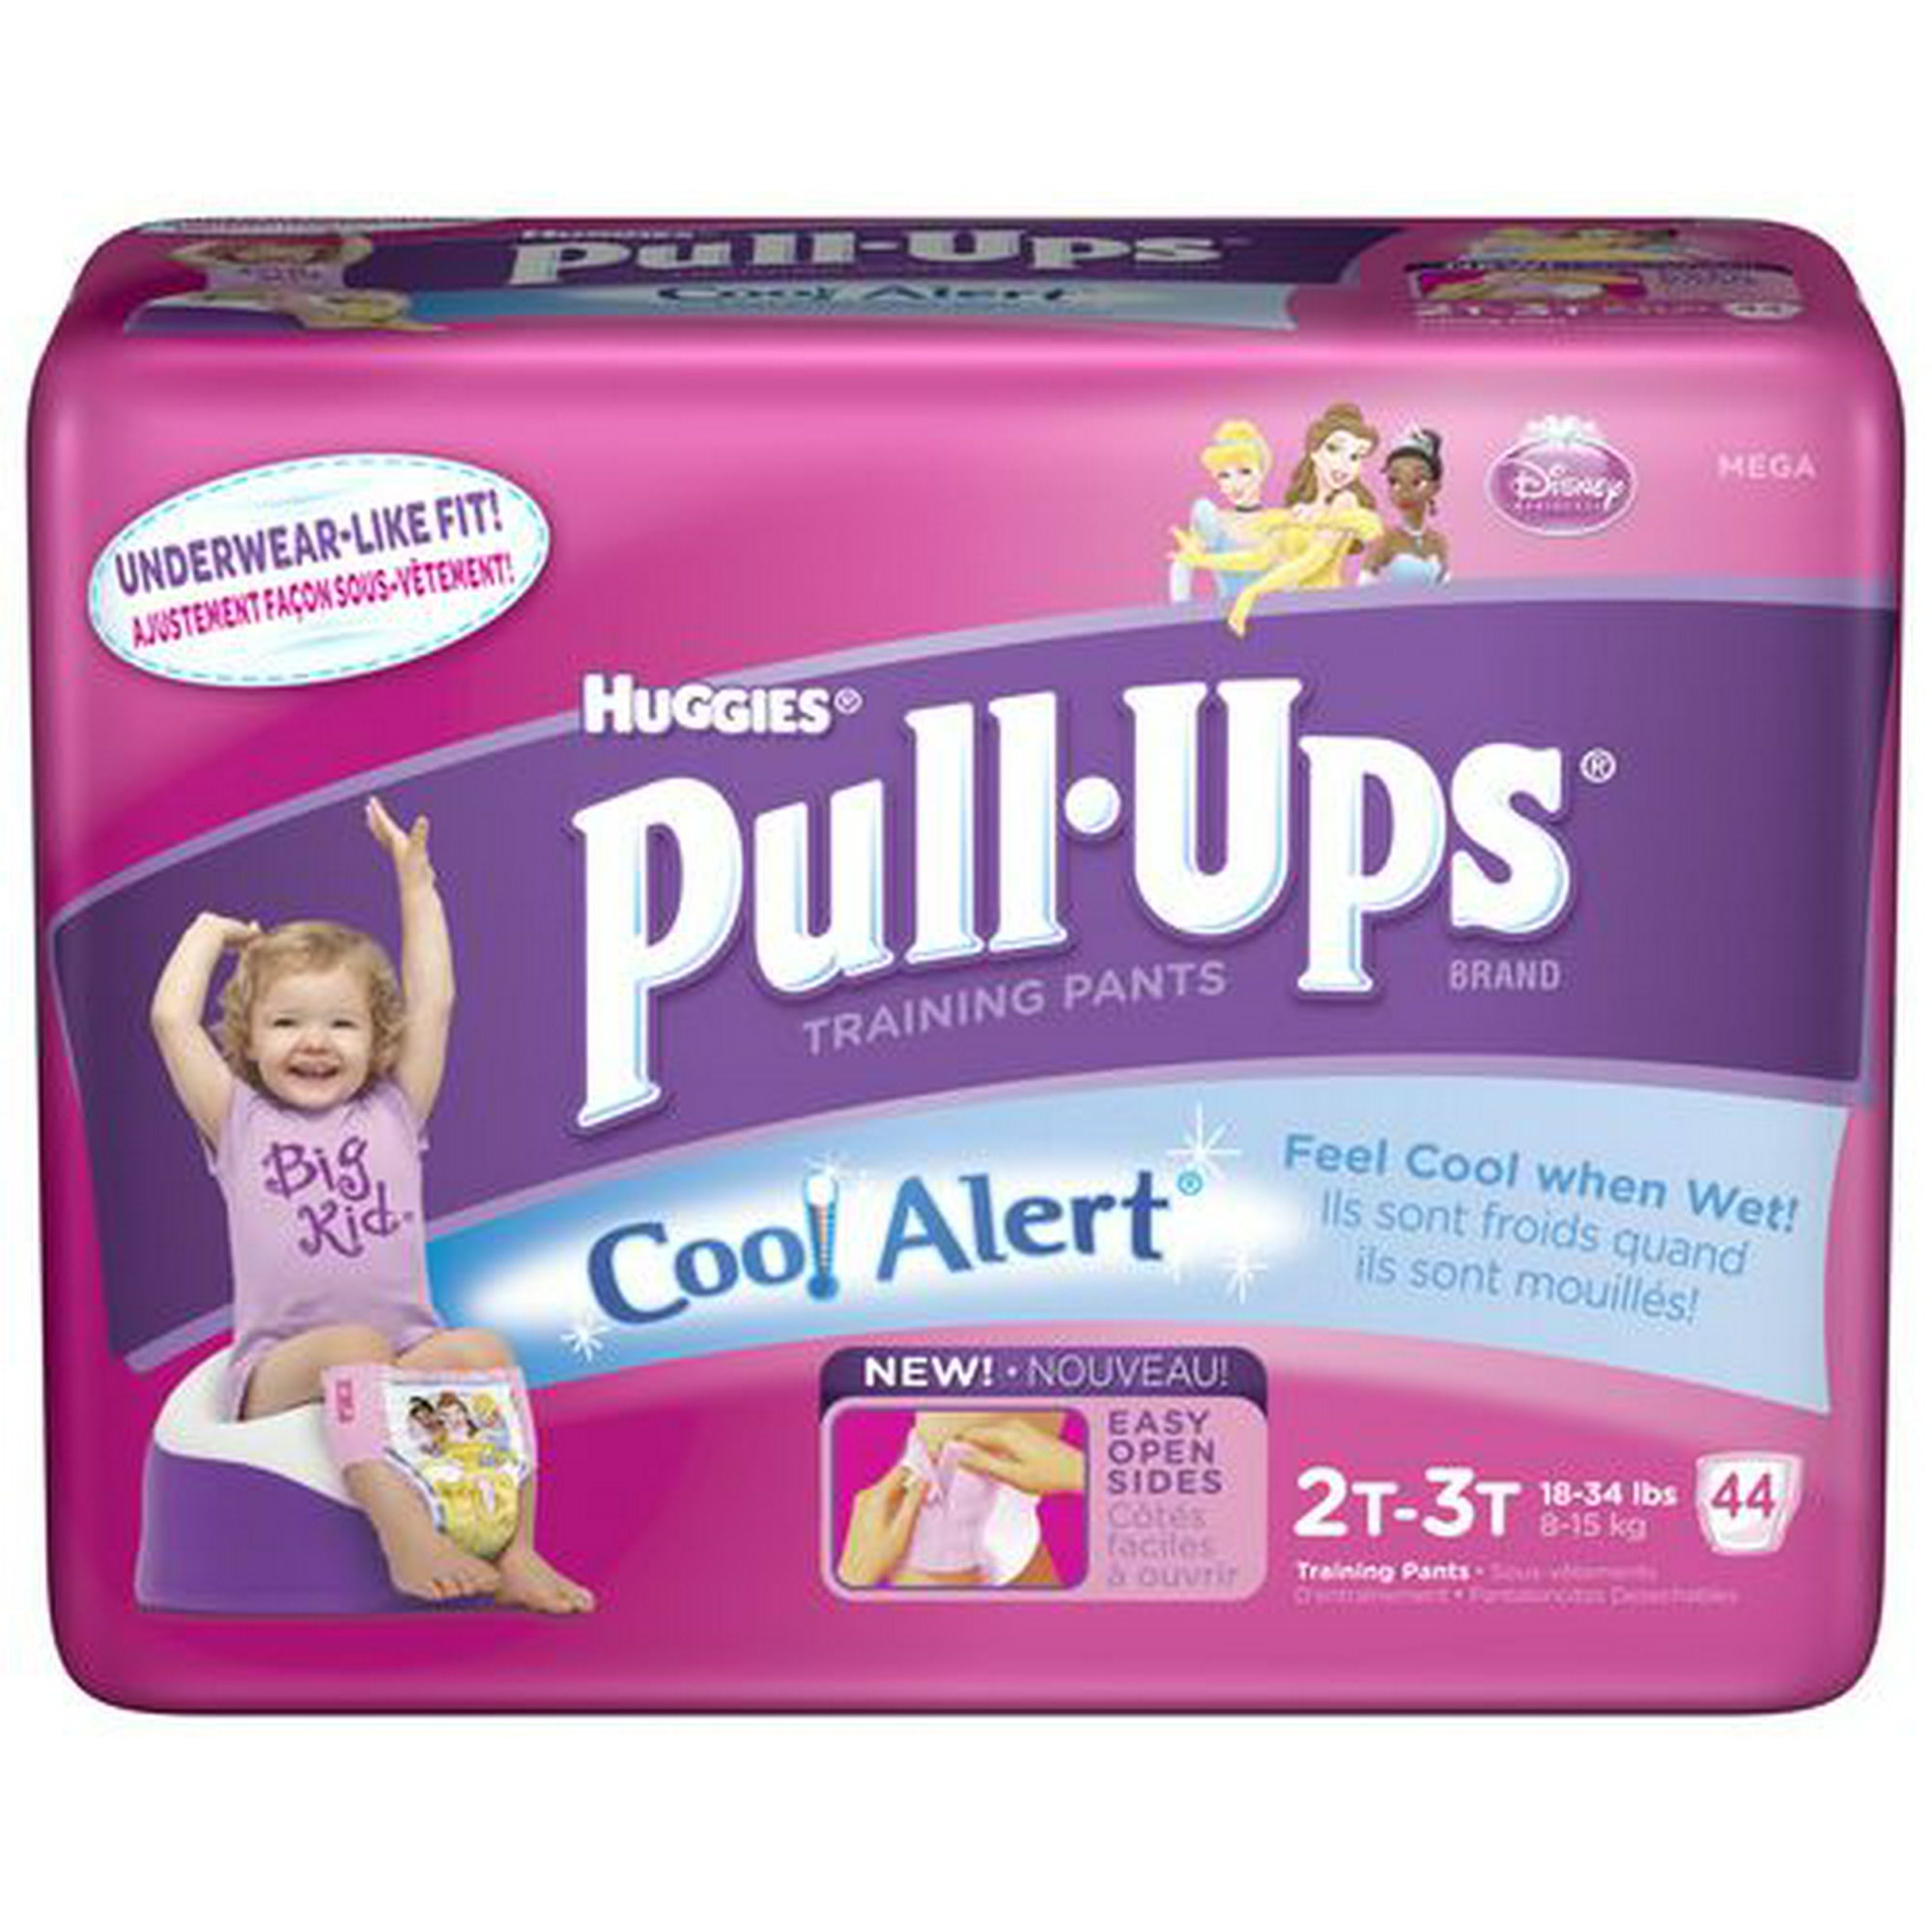 Huggies Pull-Ups Training Pants for Boys (Sizes: 2T-6T) Package